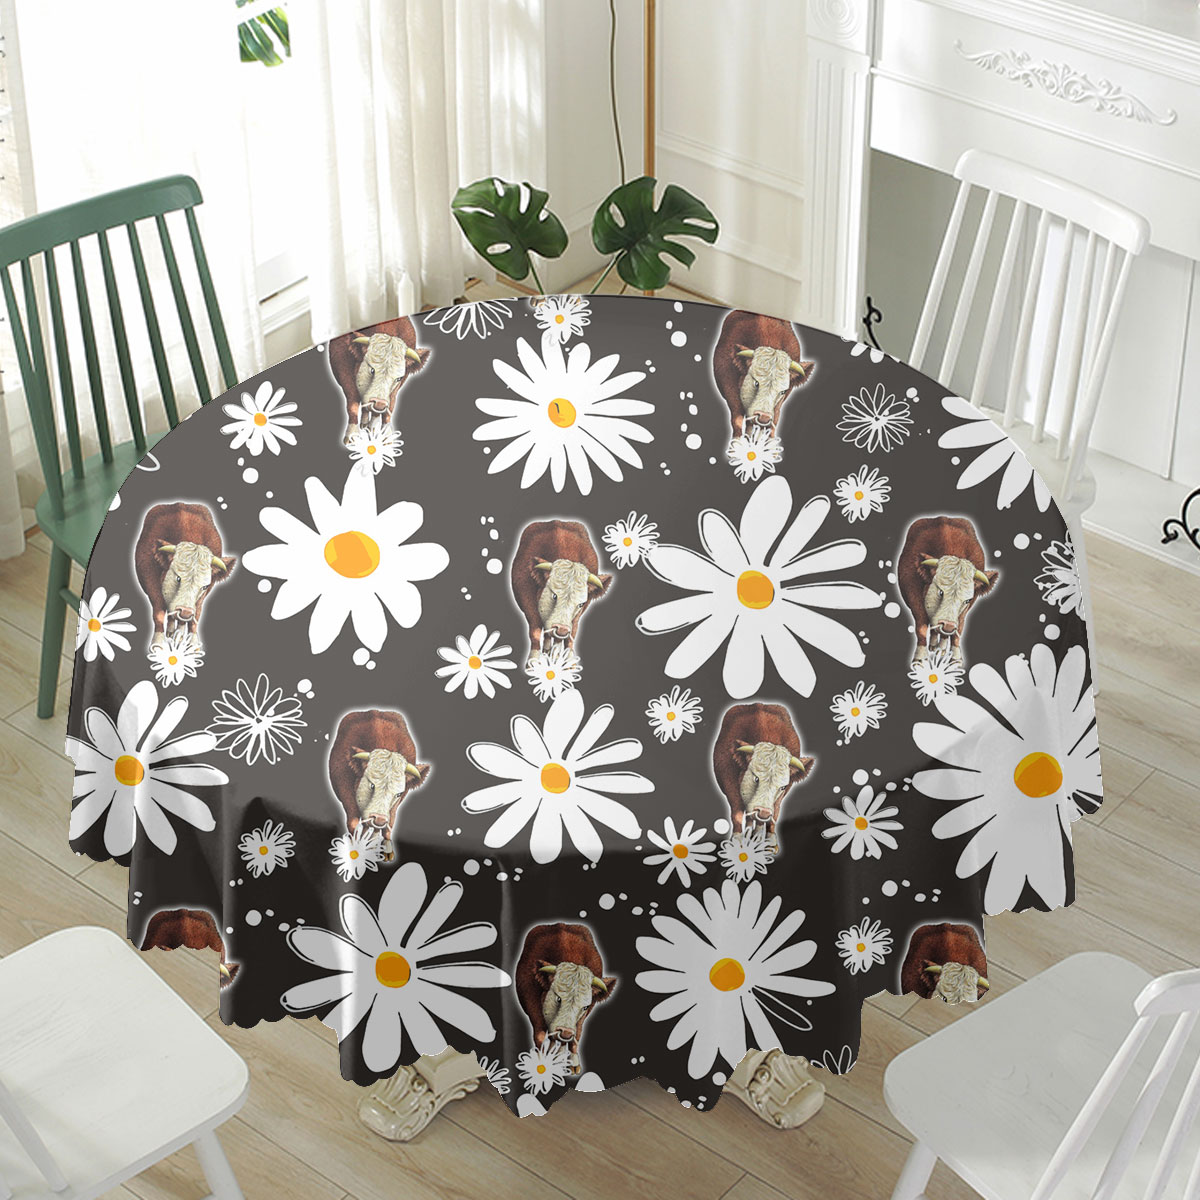 Hereford Daisy Flower Pattern Waterproof Tablecloth